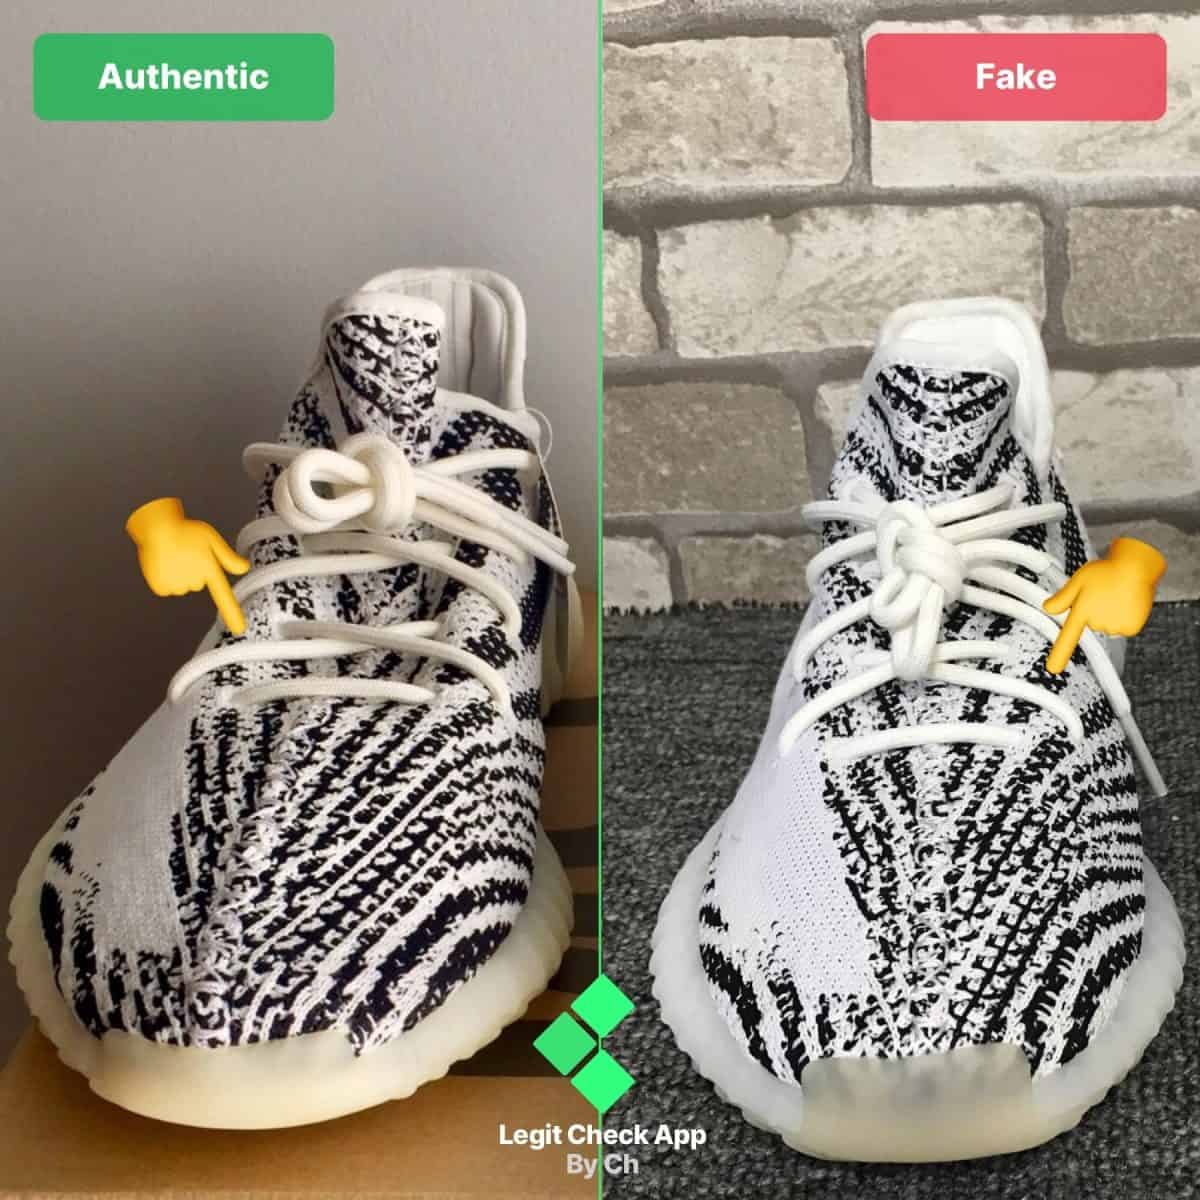 How To Tell If Yeezys Are Fake Zebra new Zealand, SAVE 42% - imprepel.com.br